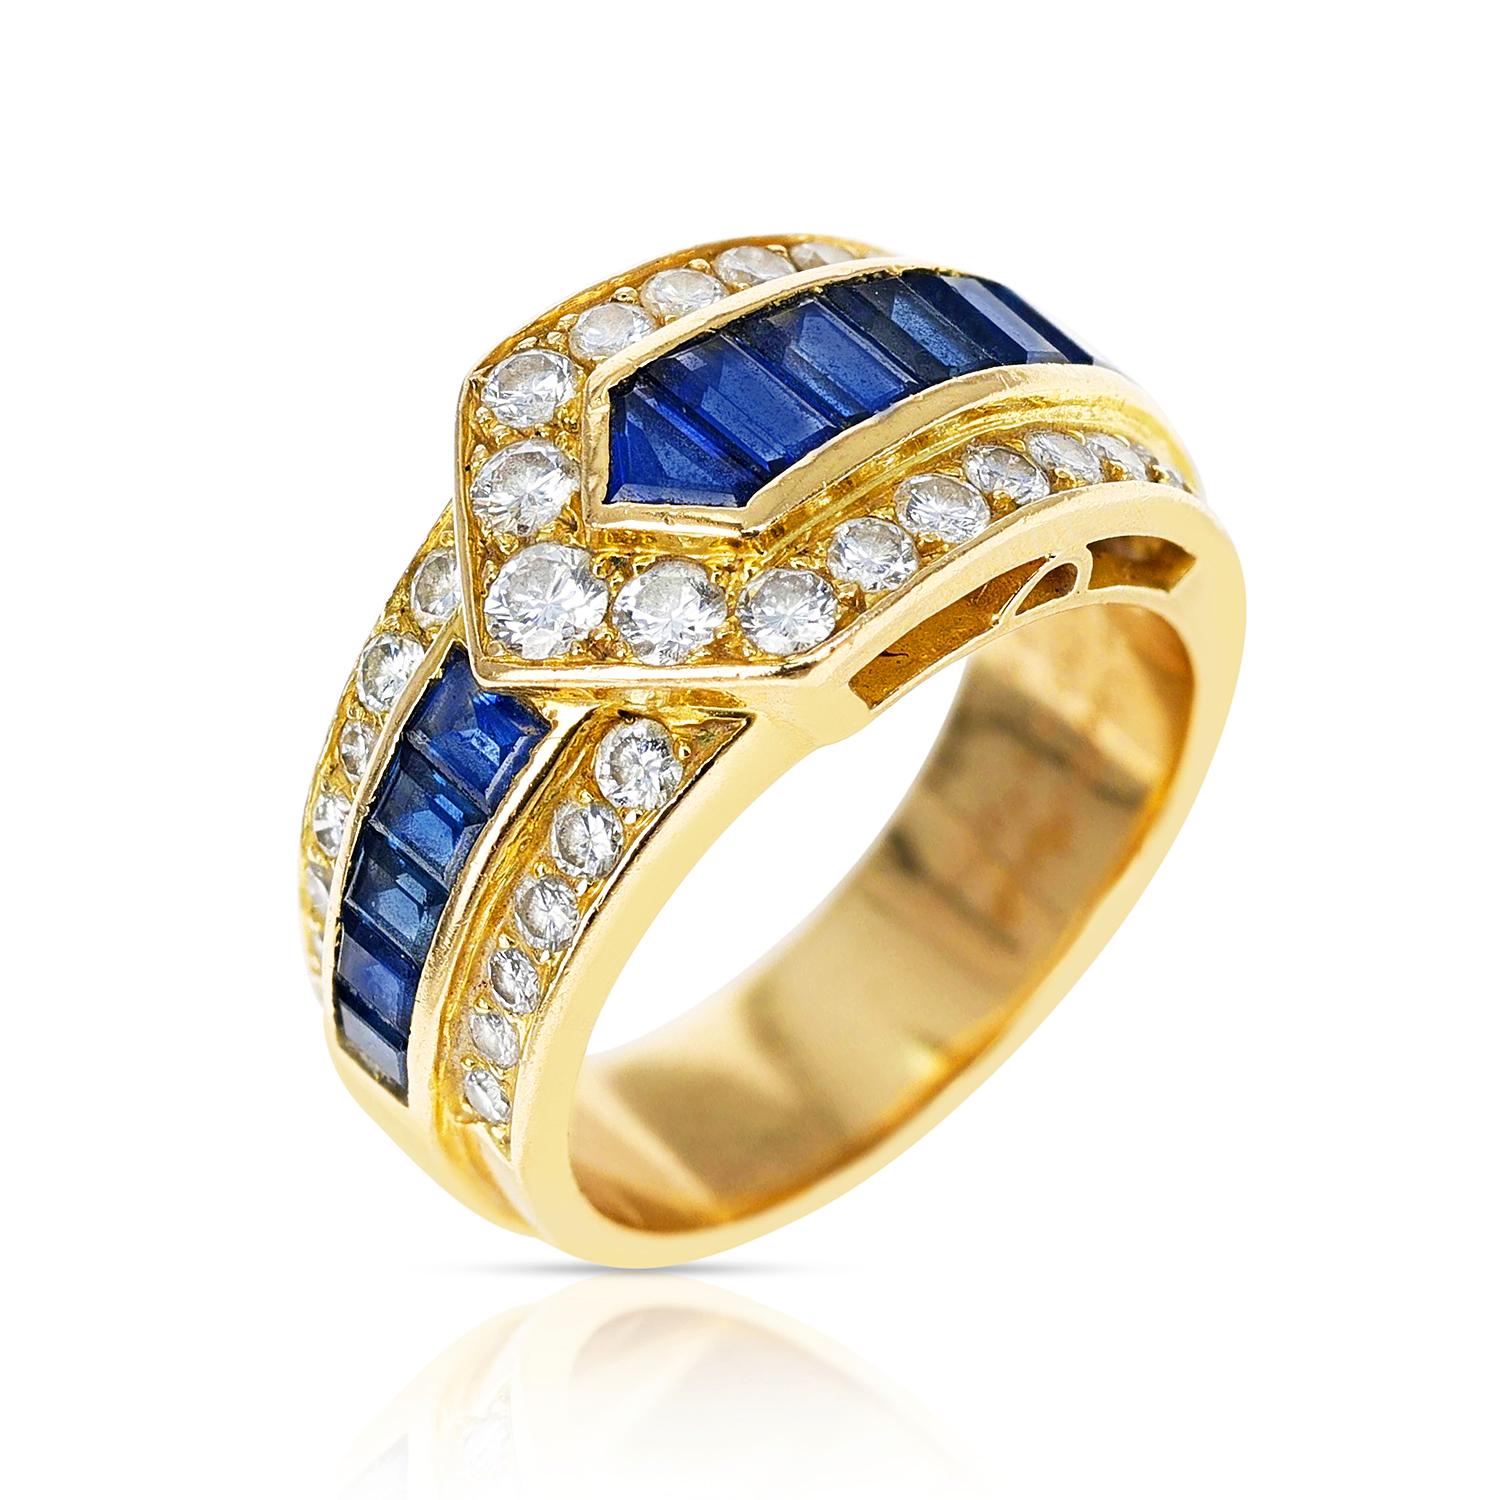 A Van Cleef & Arpels Sapphire and Diamond Arrow Band Ring made in 18 Karat Yellow Gold. The total weight is 9.22 grams. The ring size is US 6.50. 